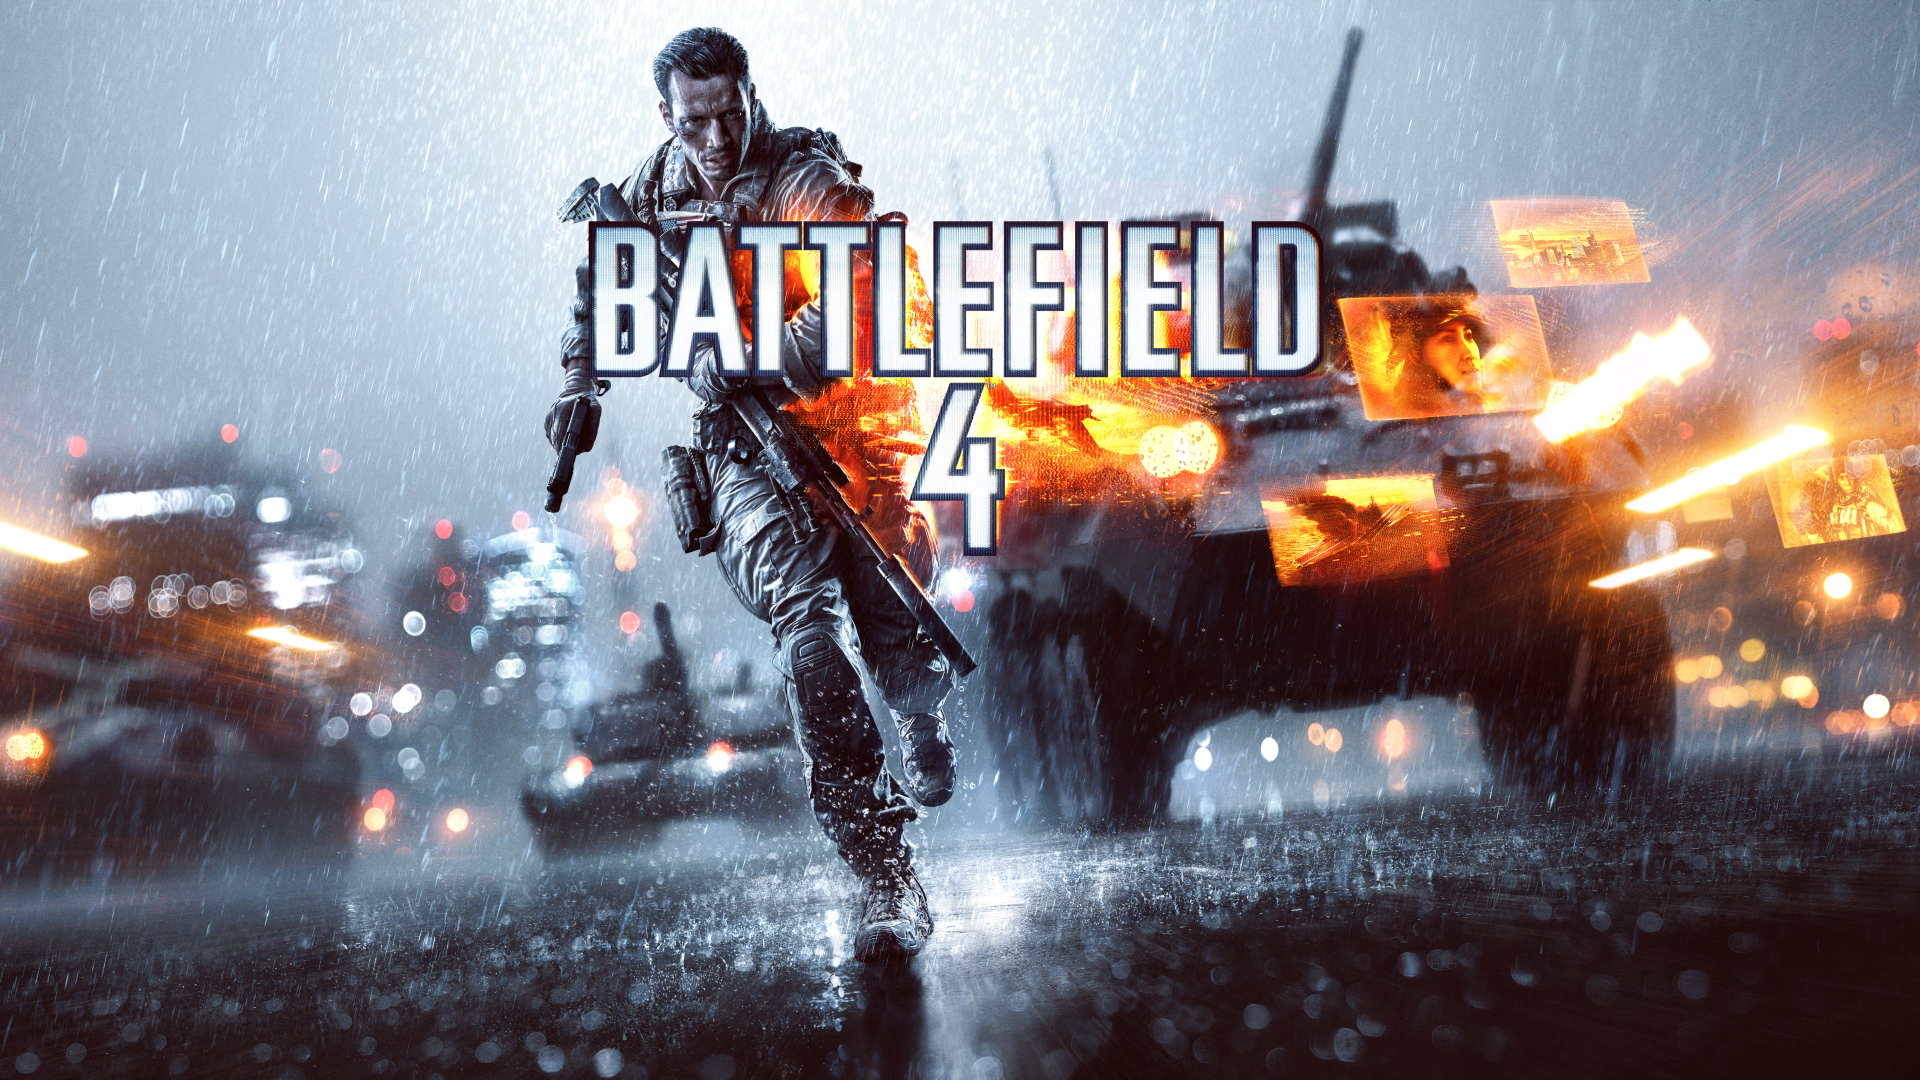 Battlefield 4 Pc For 4 99 Asian Geek Squad